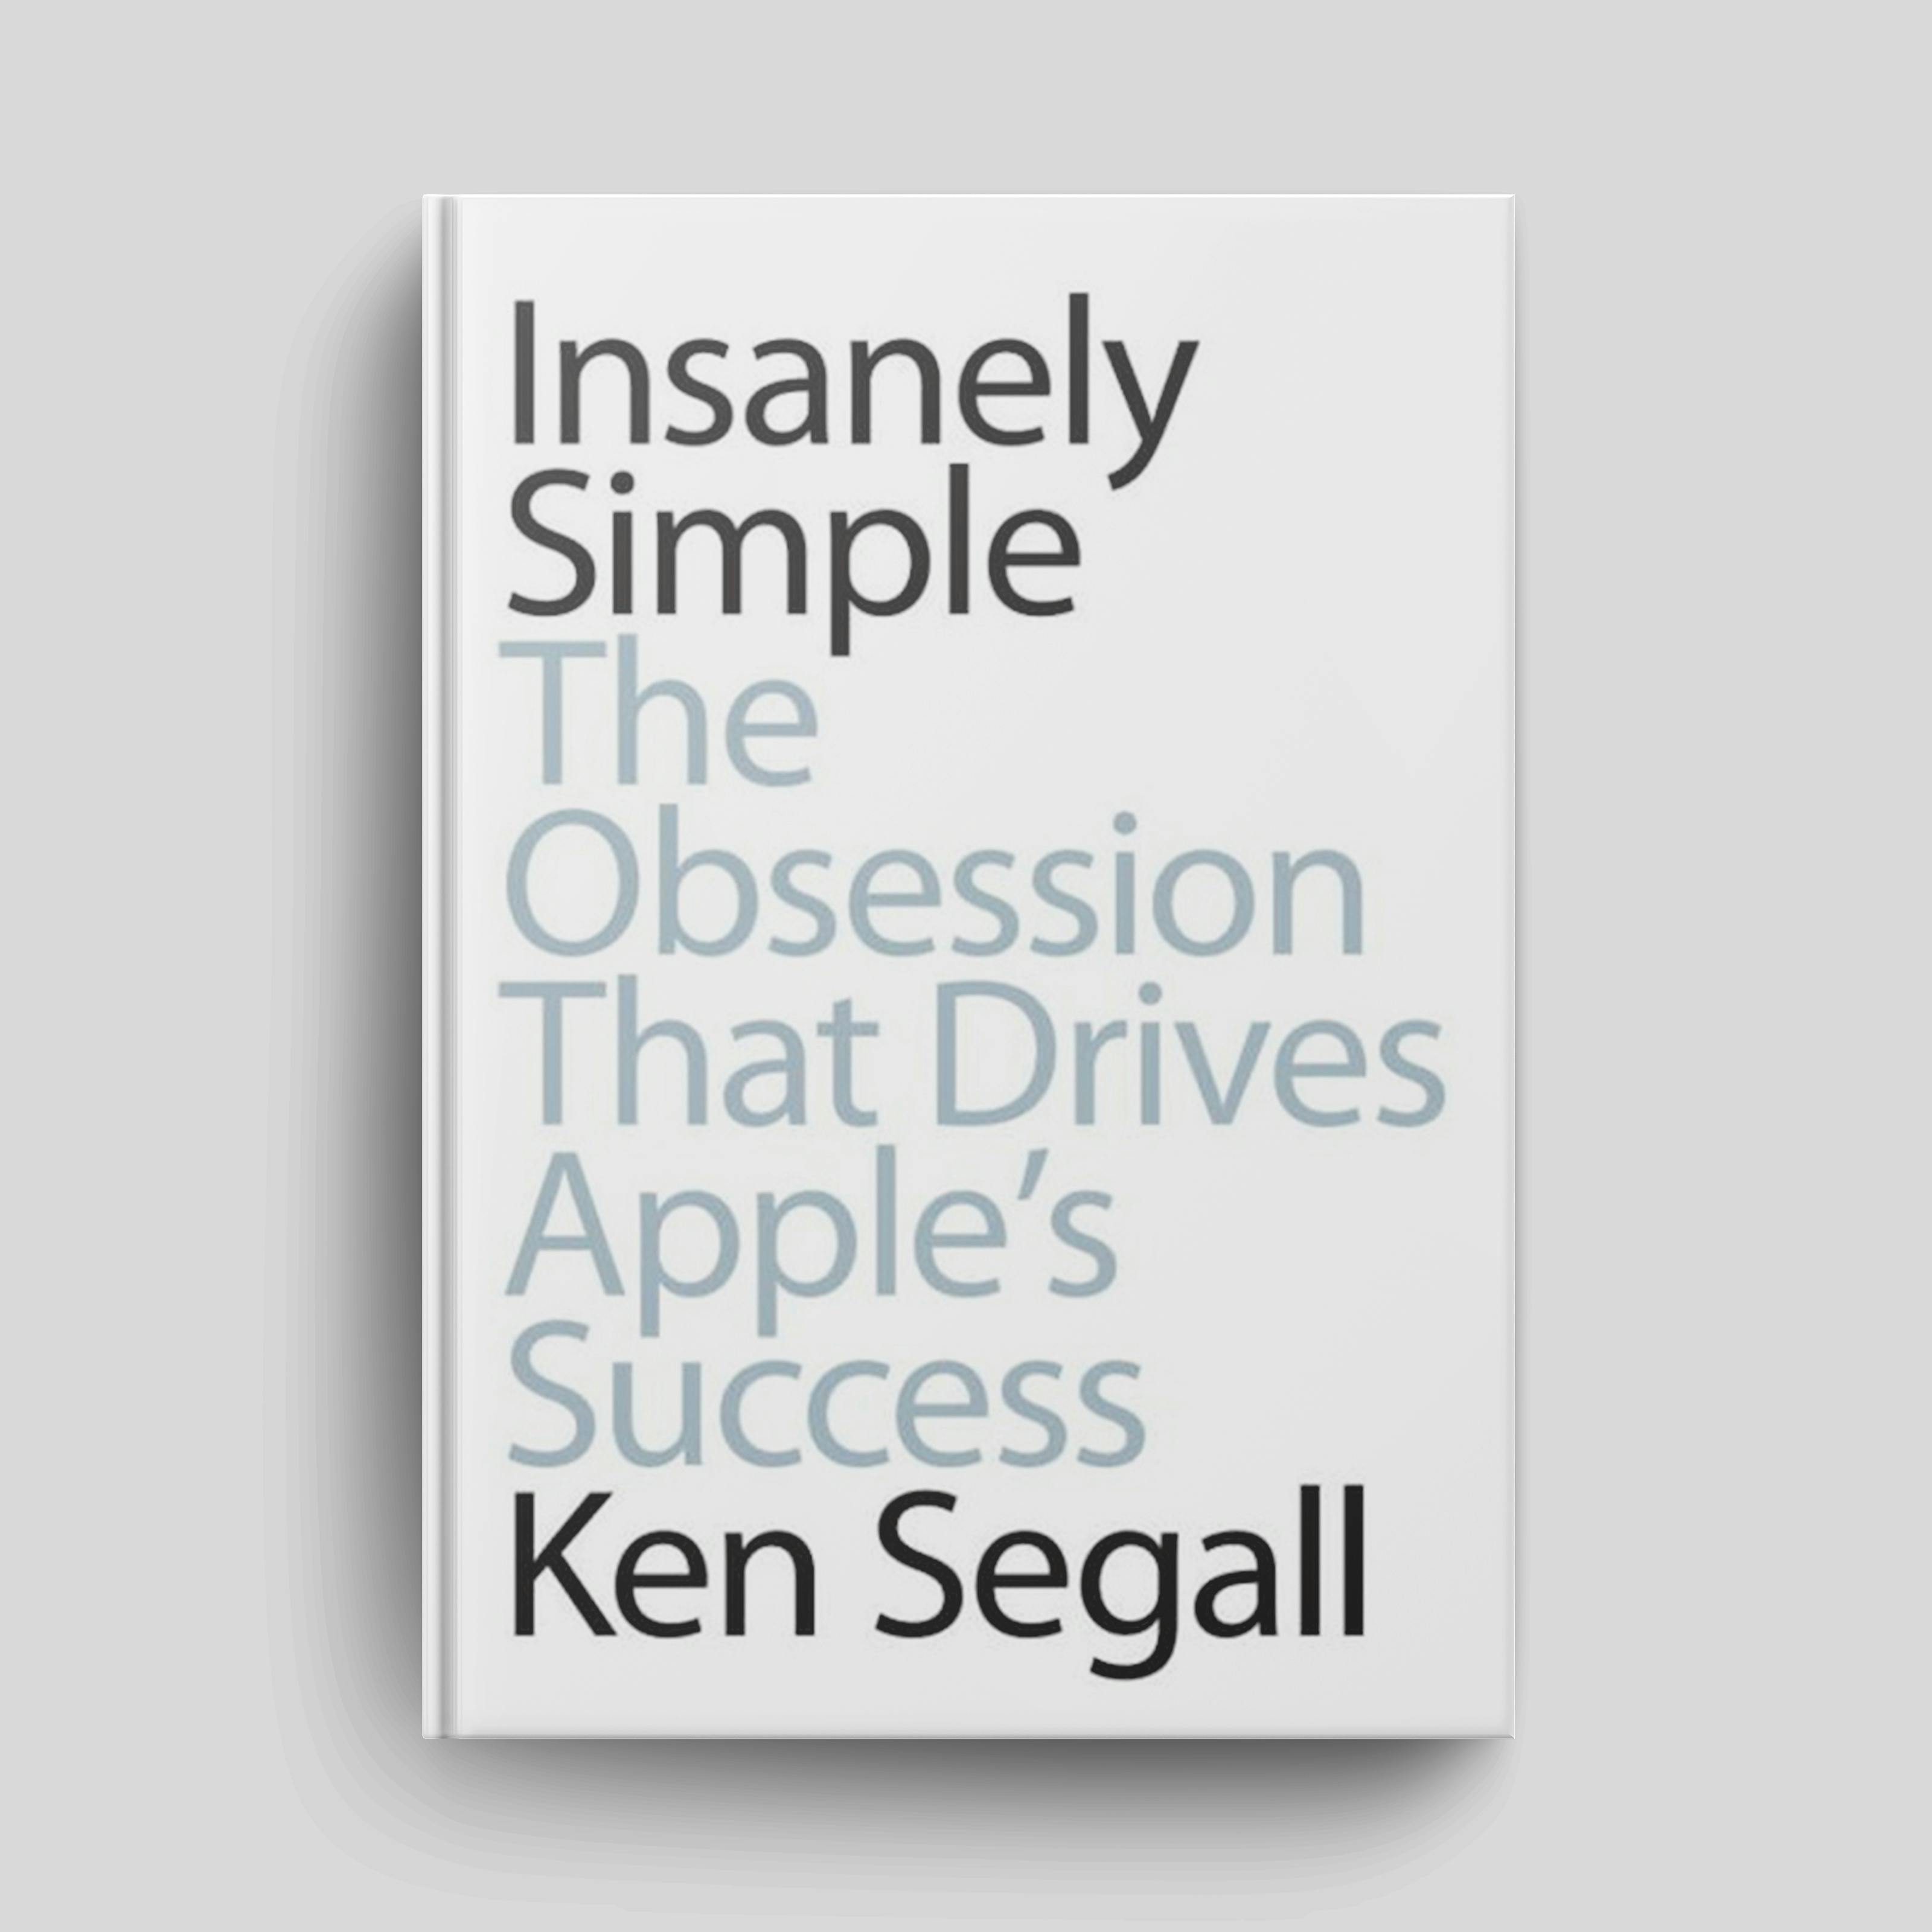 Book: (Part 2) ”Insanely Simple: The Obsession That Drives Apple’s Success” | Episode #175 (Part 2 of 2)